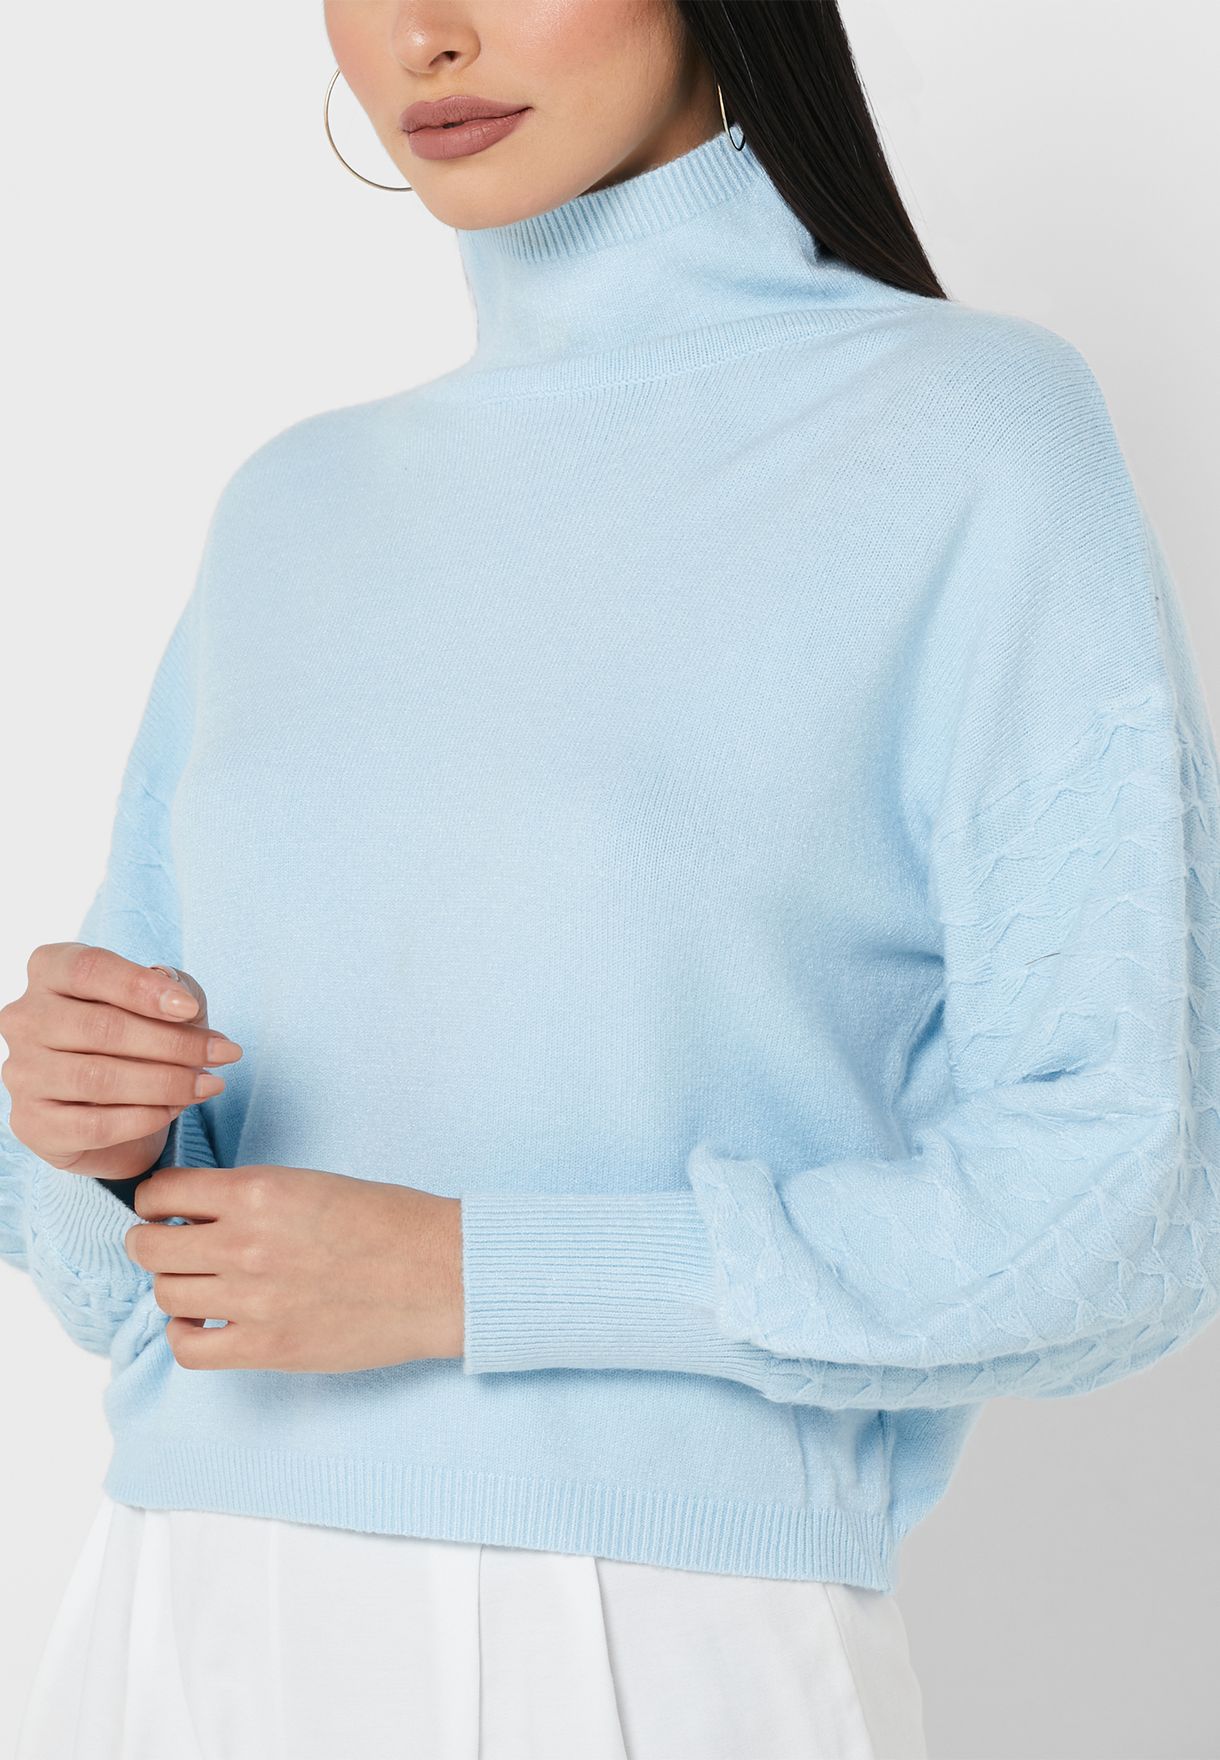 Textured Sleeve Pull Over